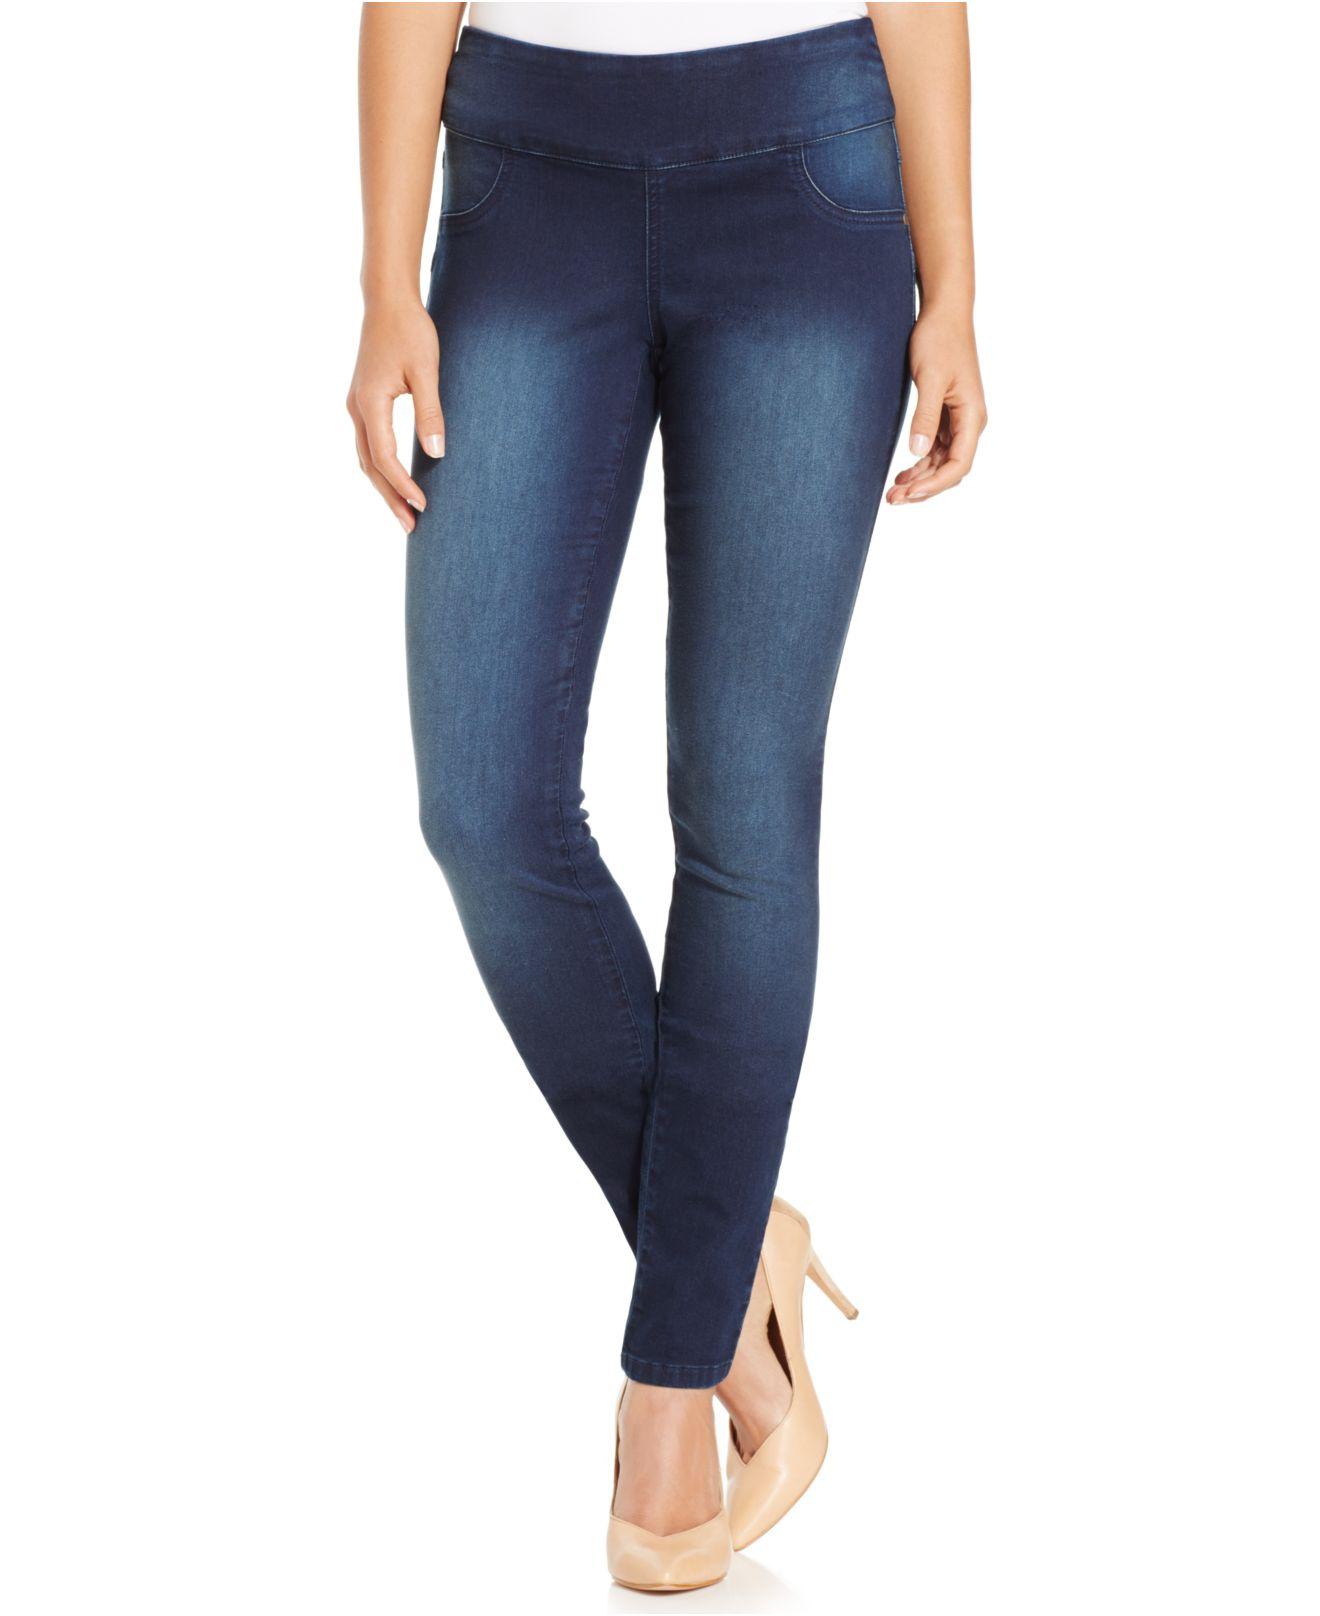 Lyst - Style & Co. Petite Jeans, Curvy-fit Pull-on Jeggings, Galaxy ...